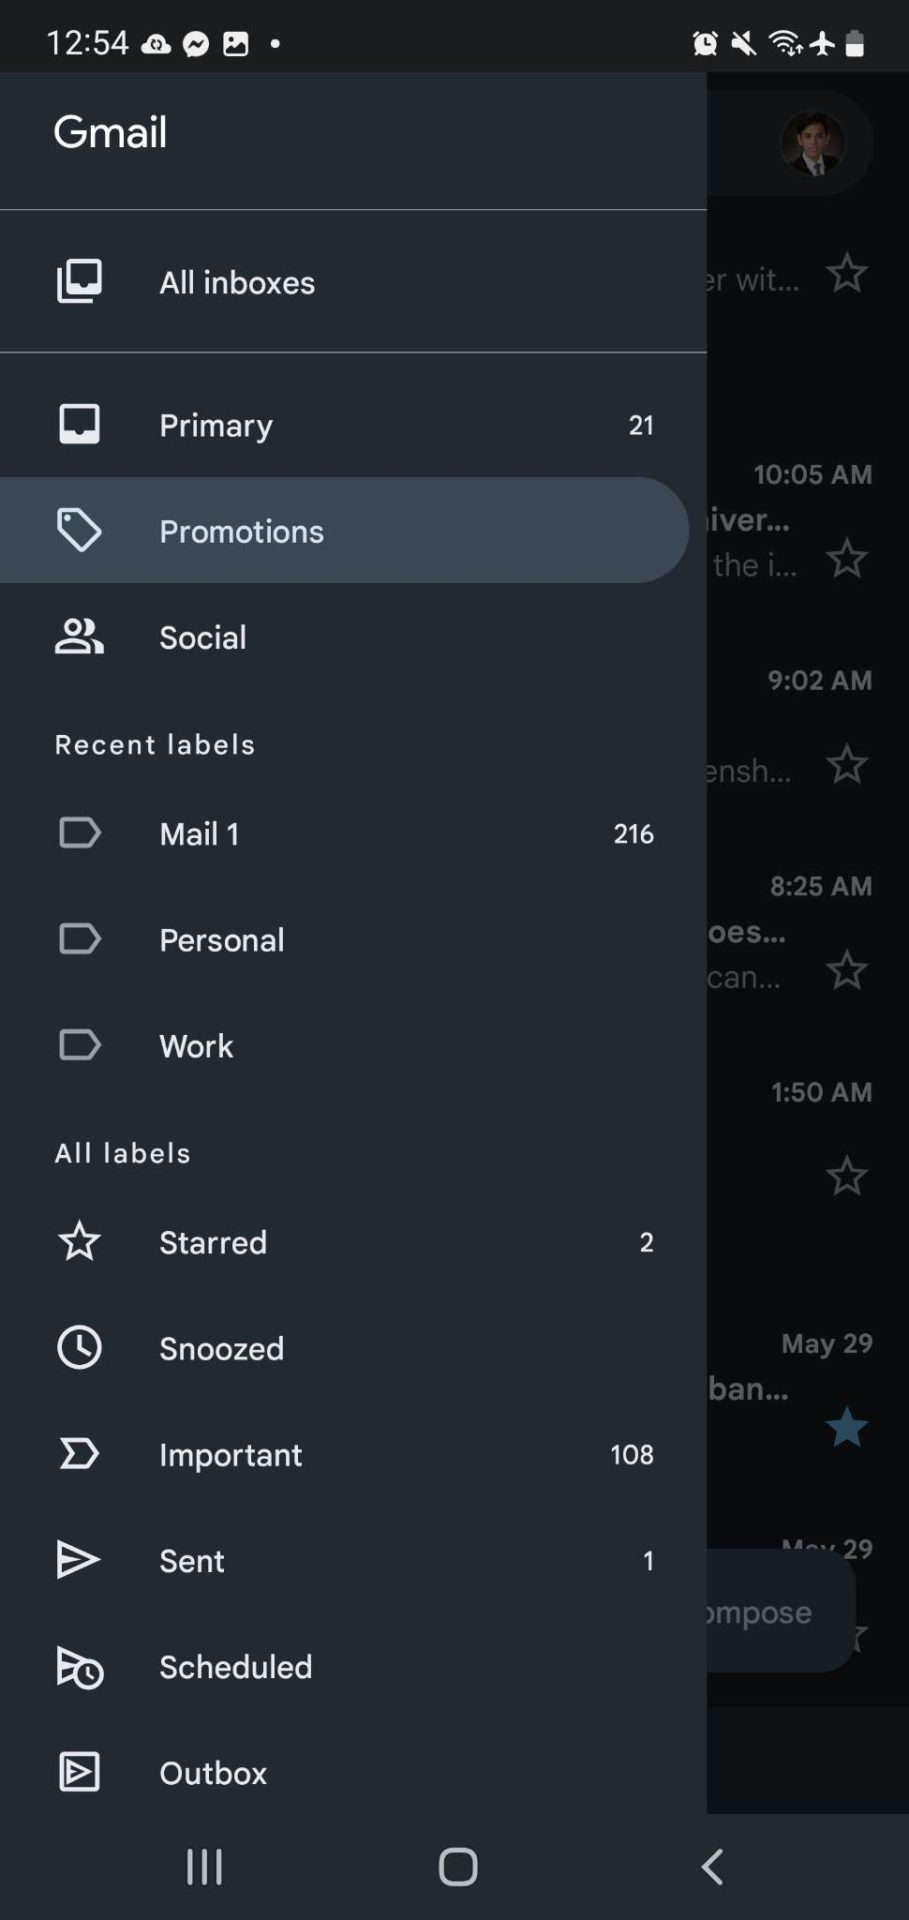 Promotions tab on Gmail app.